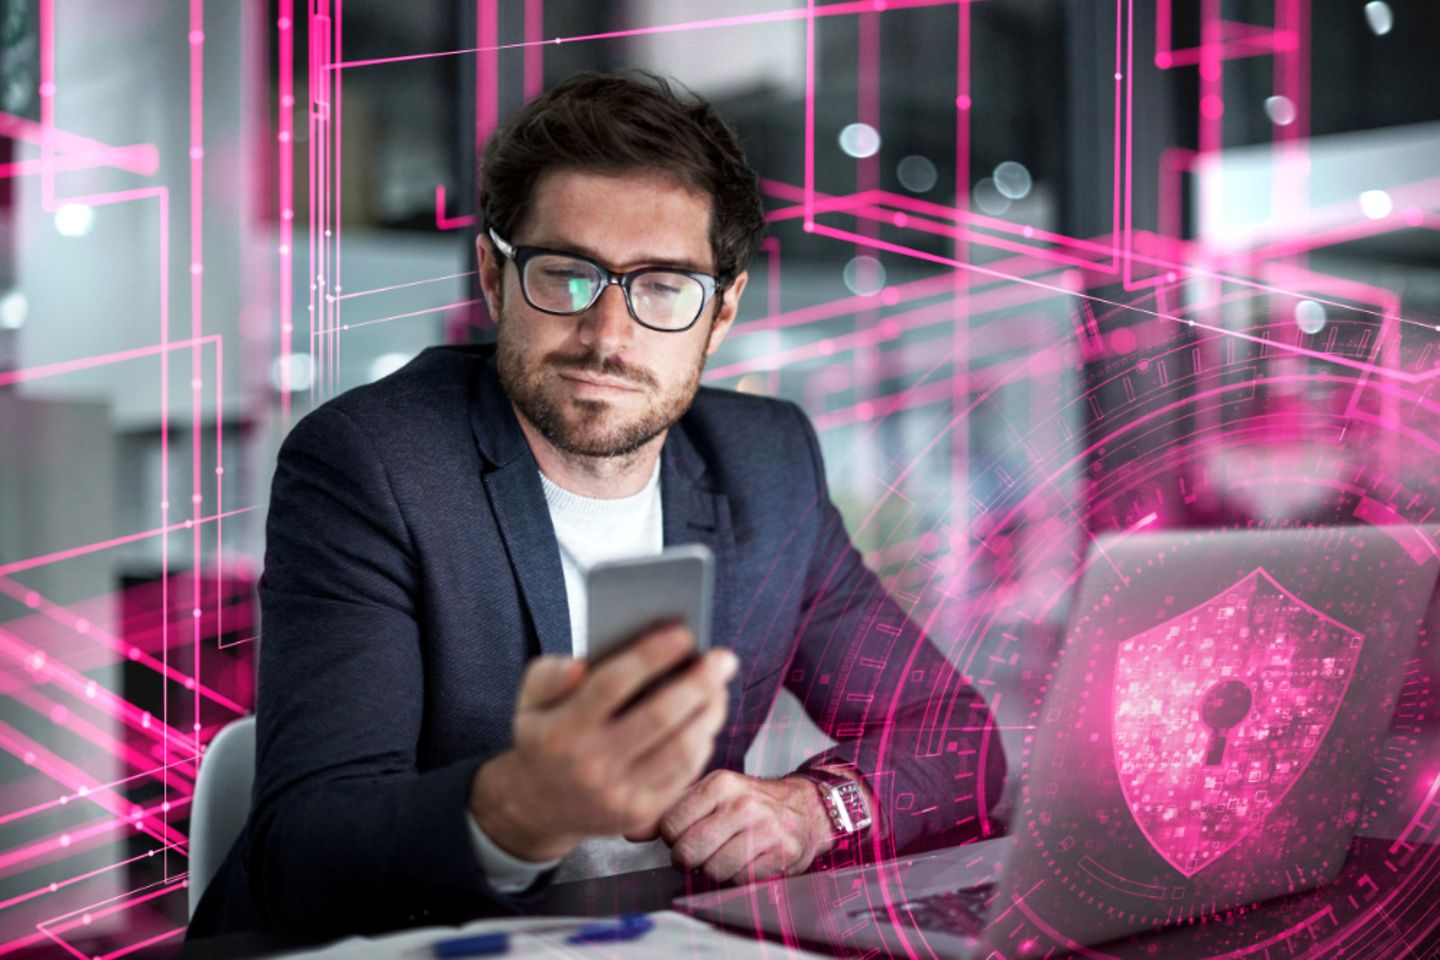 A man looks at his phone, surrounded by magenta-colored holograms